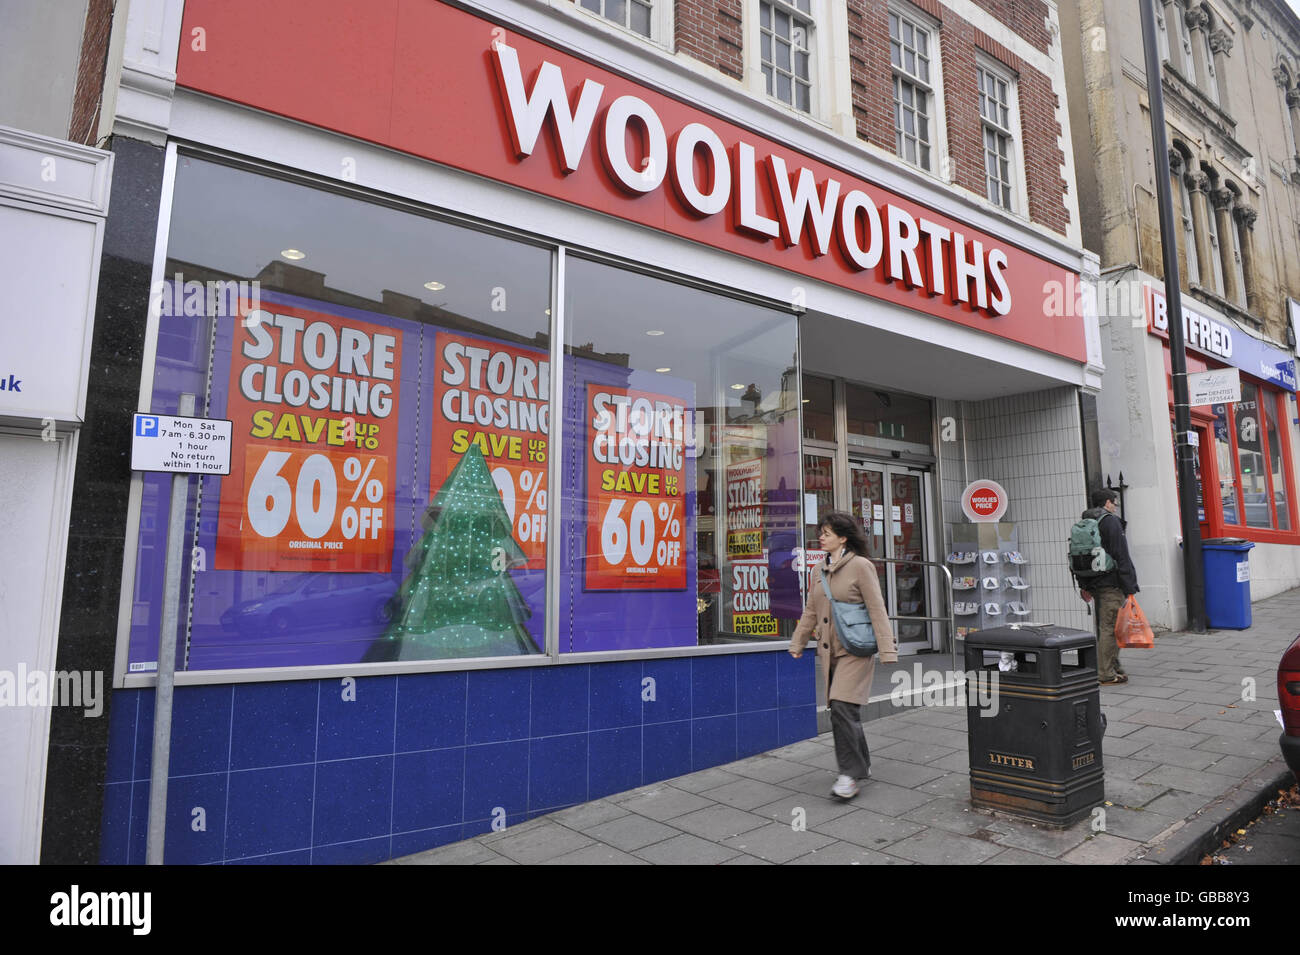 Woolworths closures Stock Photo